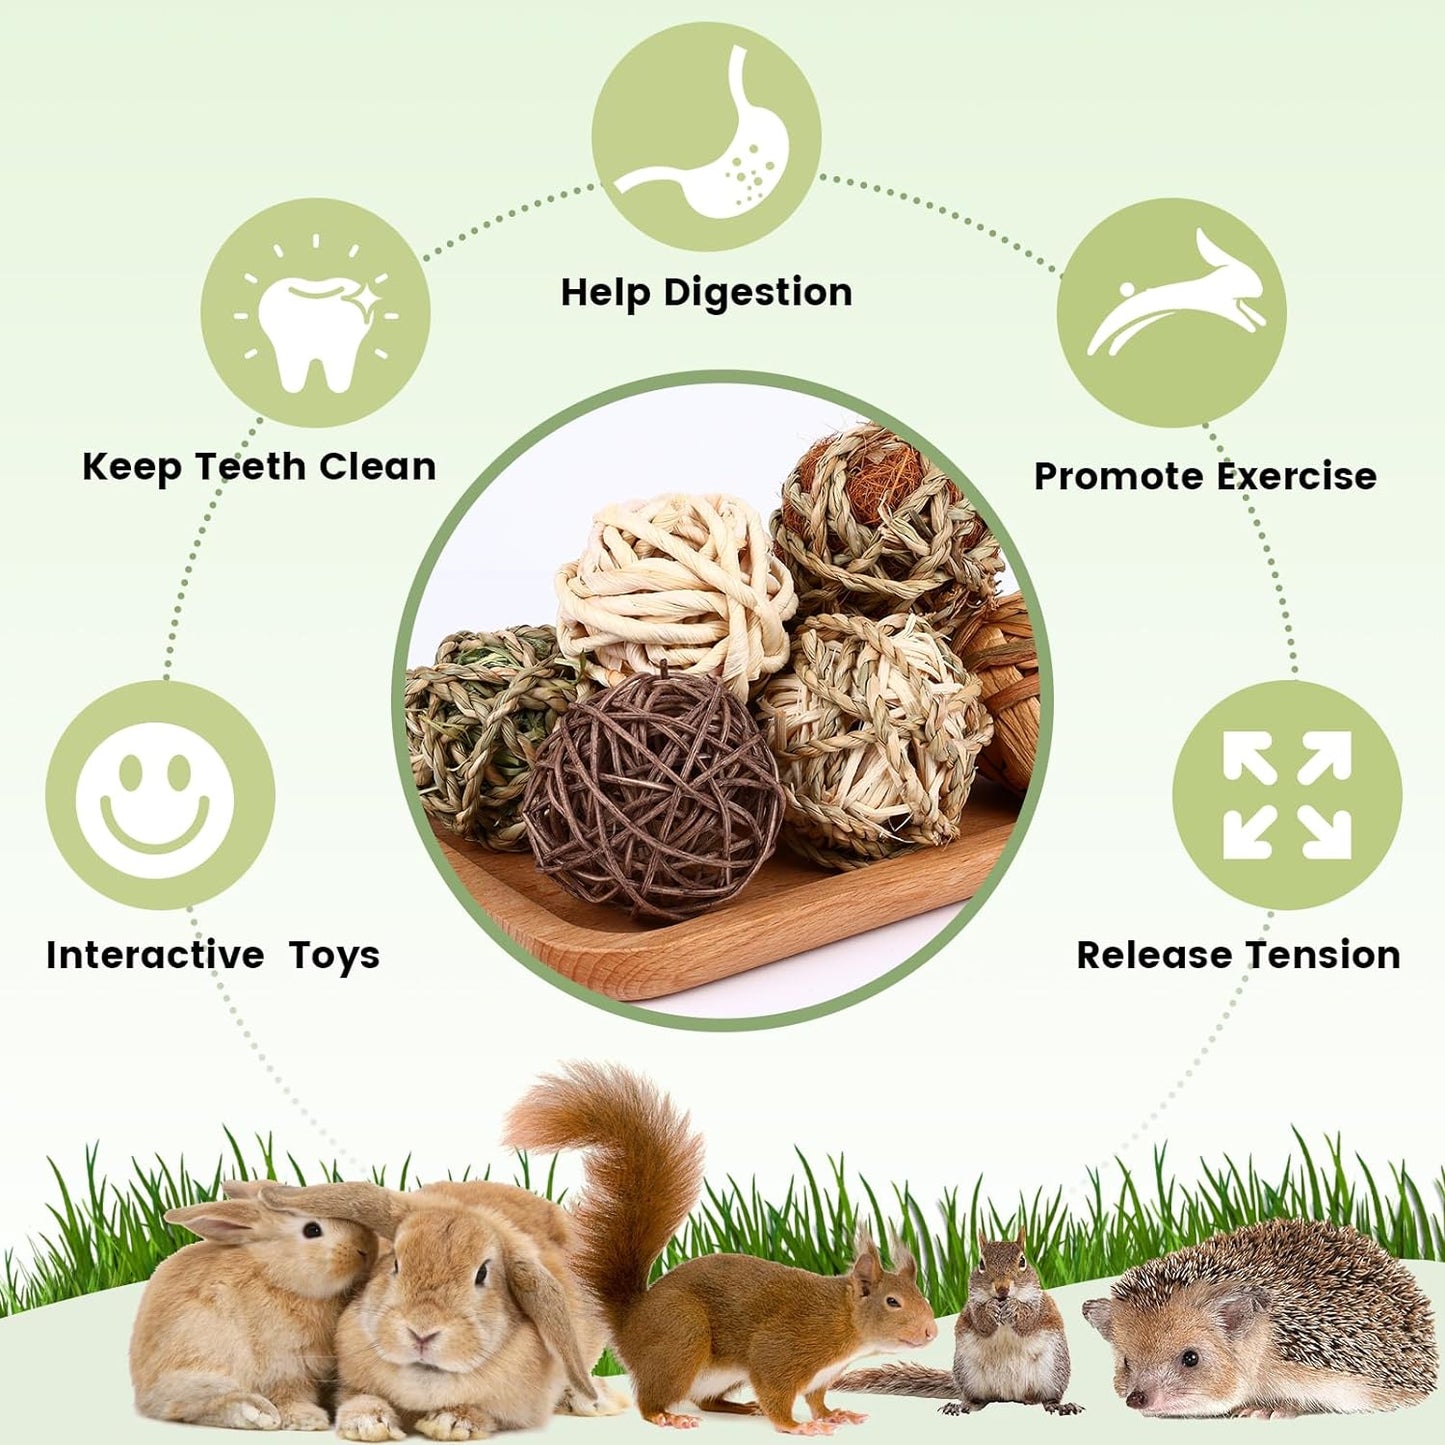 Bunny Chew Grass Balls, Rolling Chew Toys for Small Animals, Improving Dental Health, Natural Chew Grass Toys for Rabbits, Guinea Pigs, Chinchillas, Hamsters, Mice (8 Pcs)